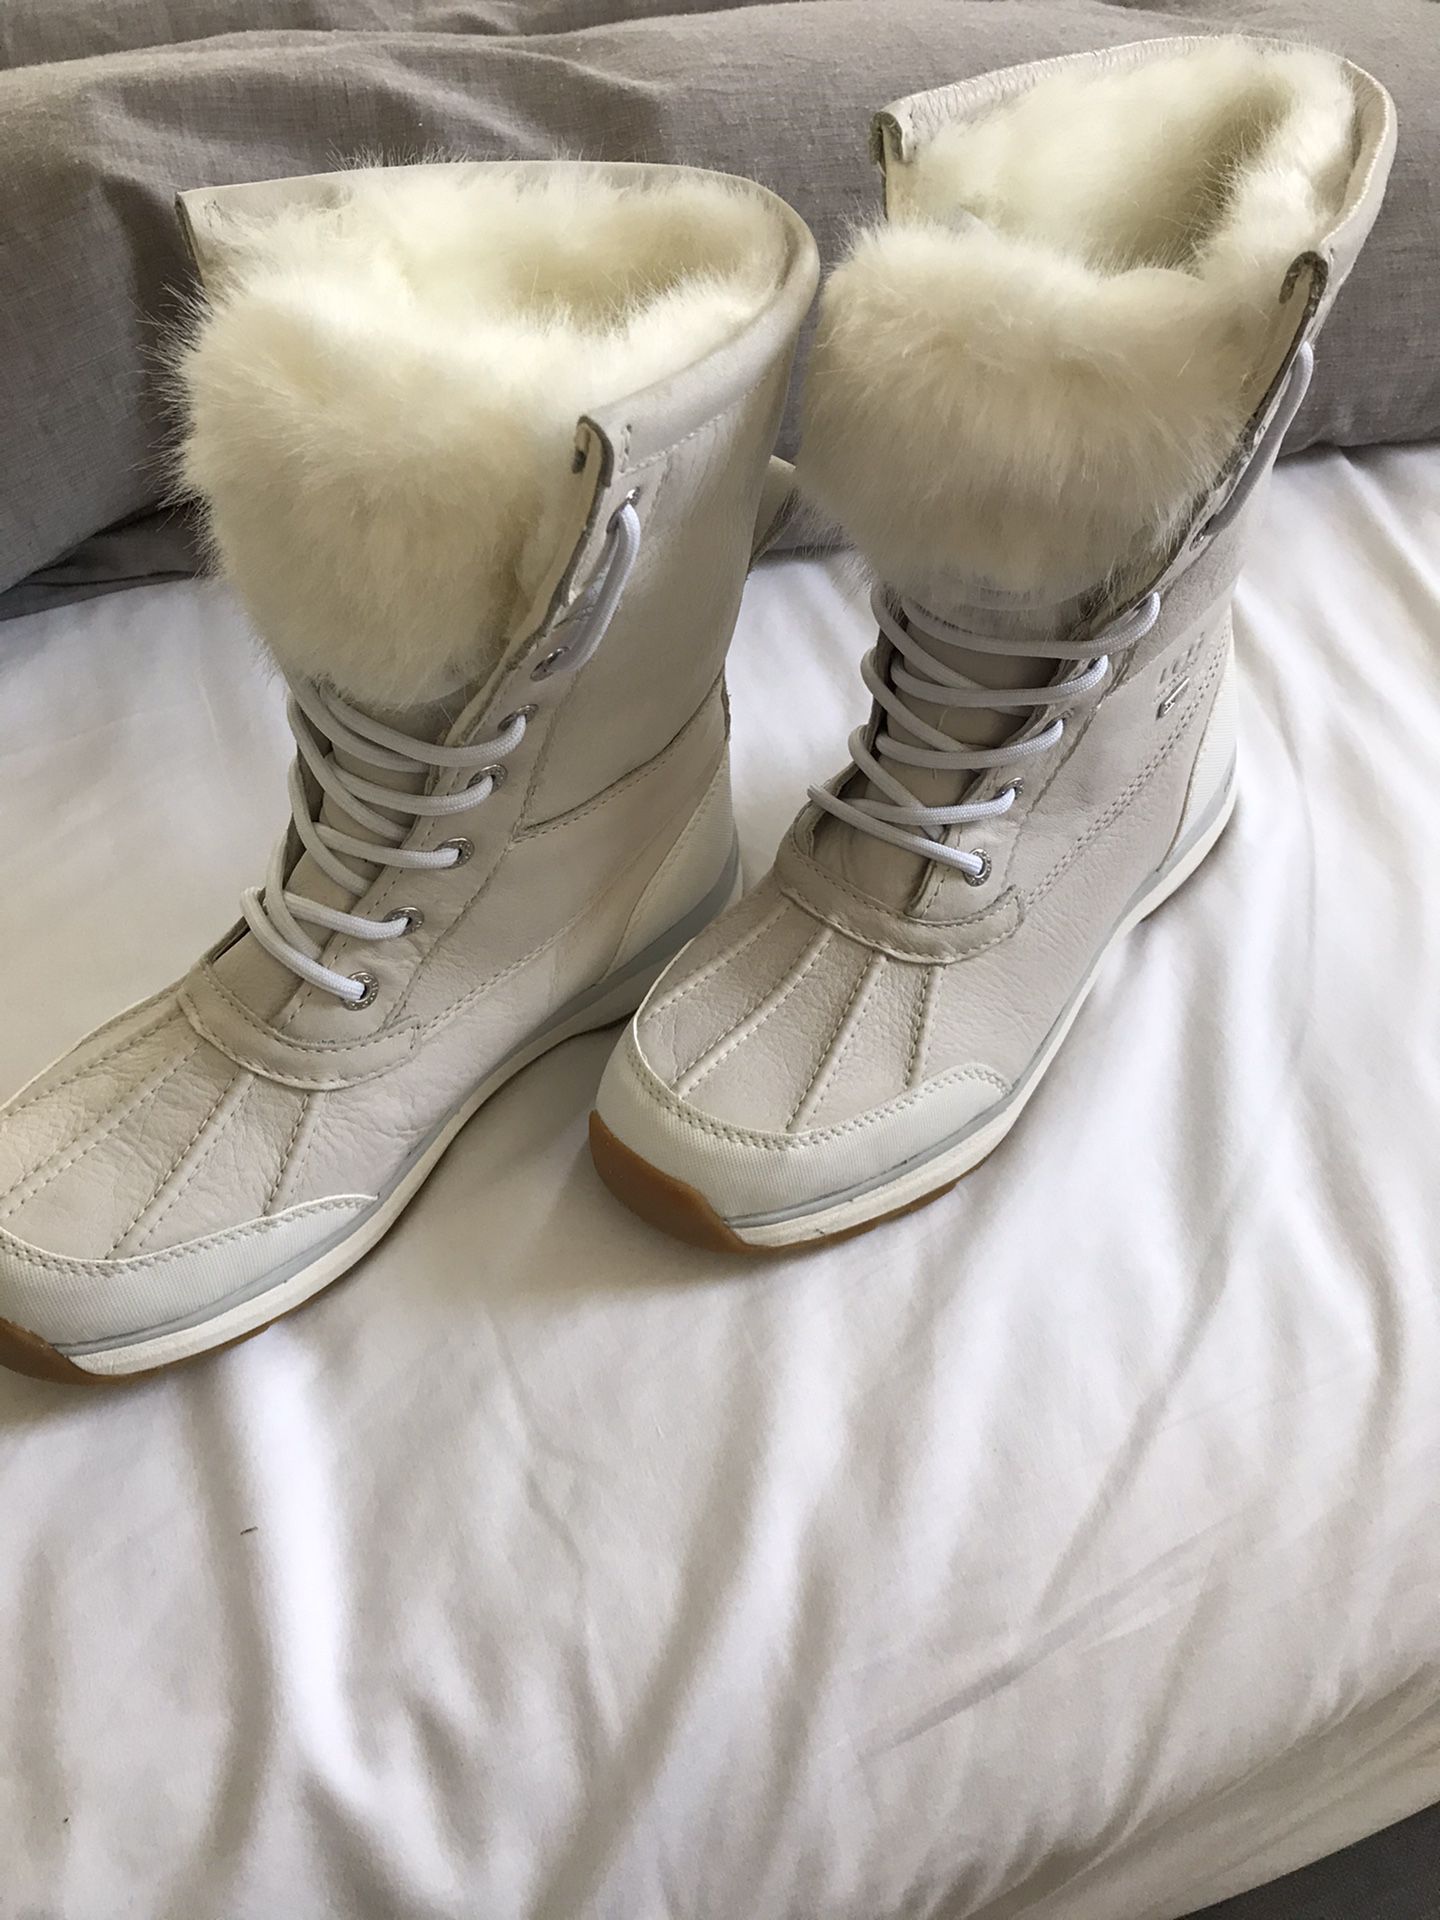 Authentic New Ugg waterproof boots